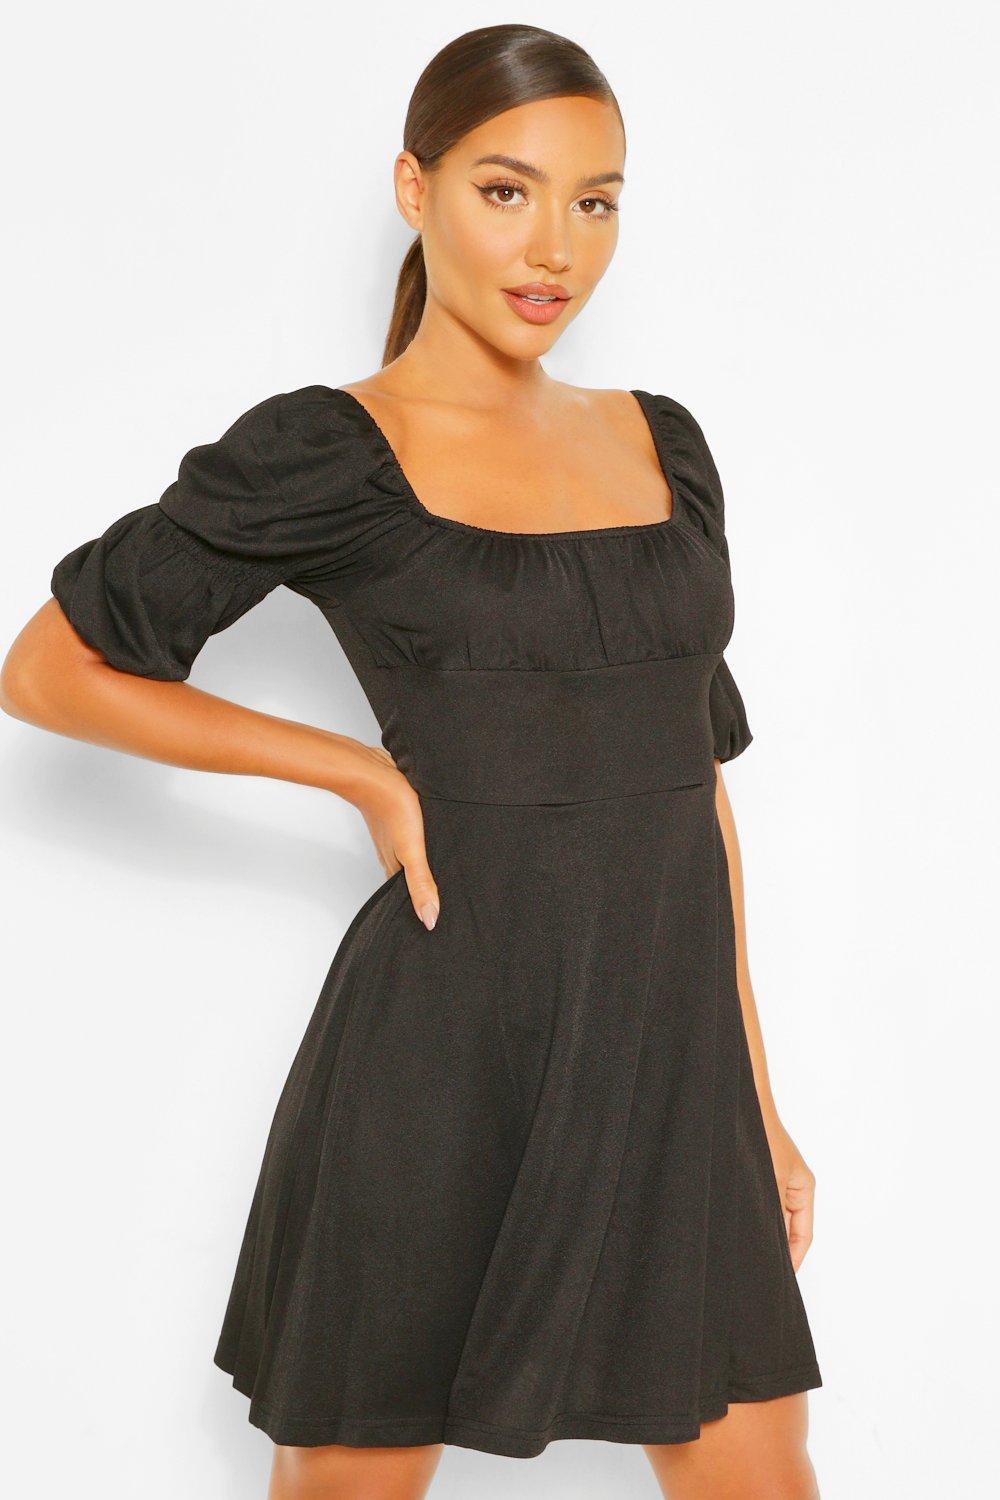 boohoo Womens Puff Sleeve Rouched Bust Skater Dress - Black - 10, Black